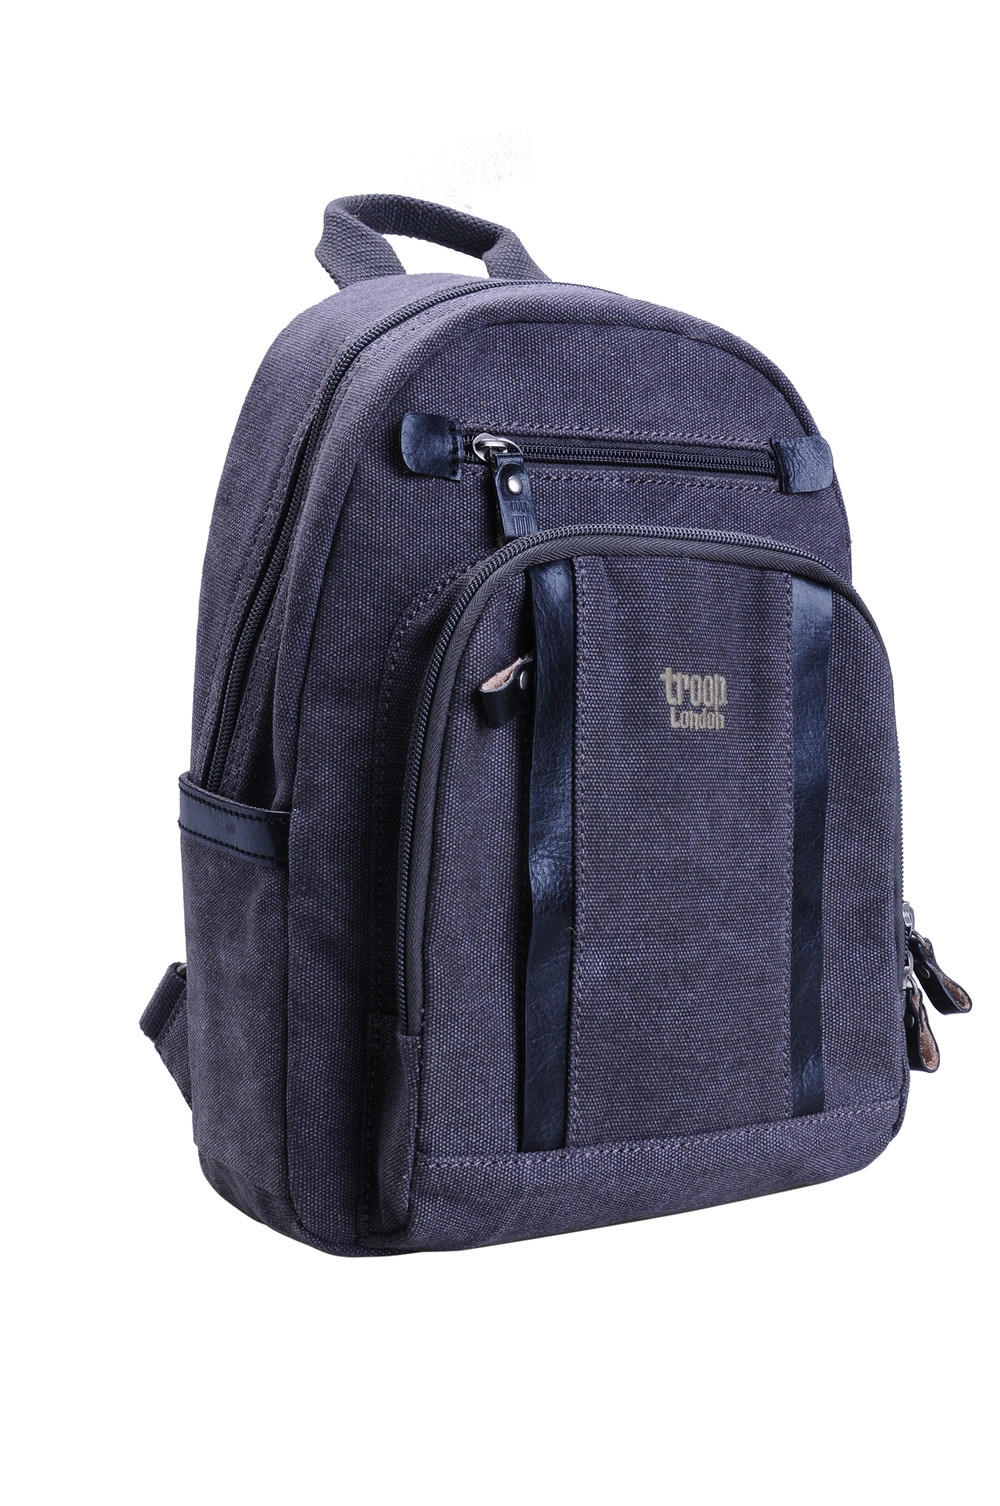 Troop London Classic Small Backpack - Black - Sunset Surf & Turf